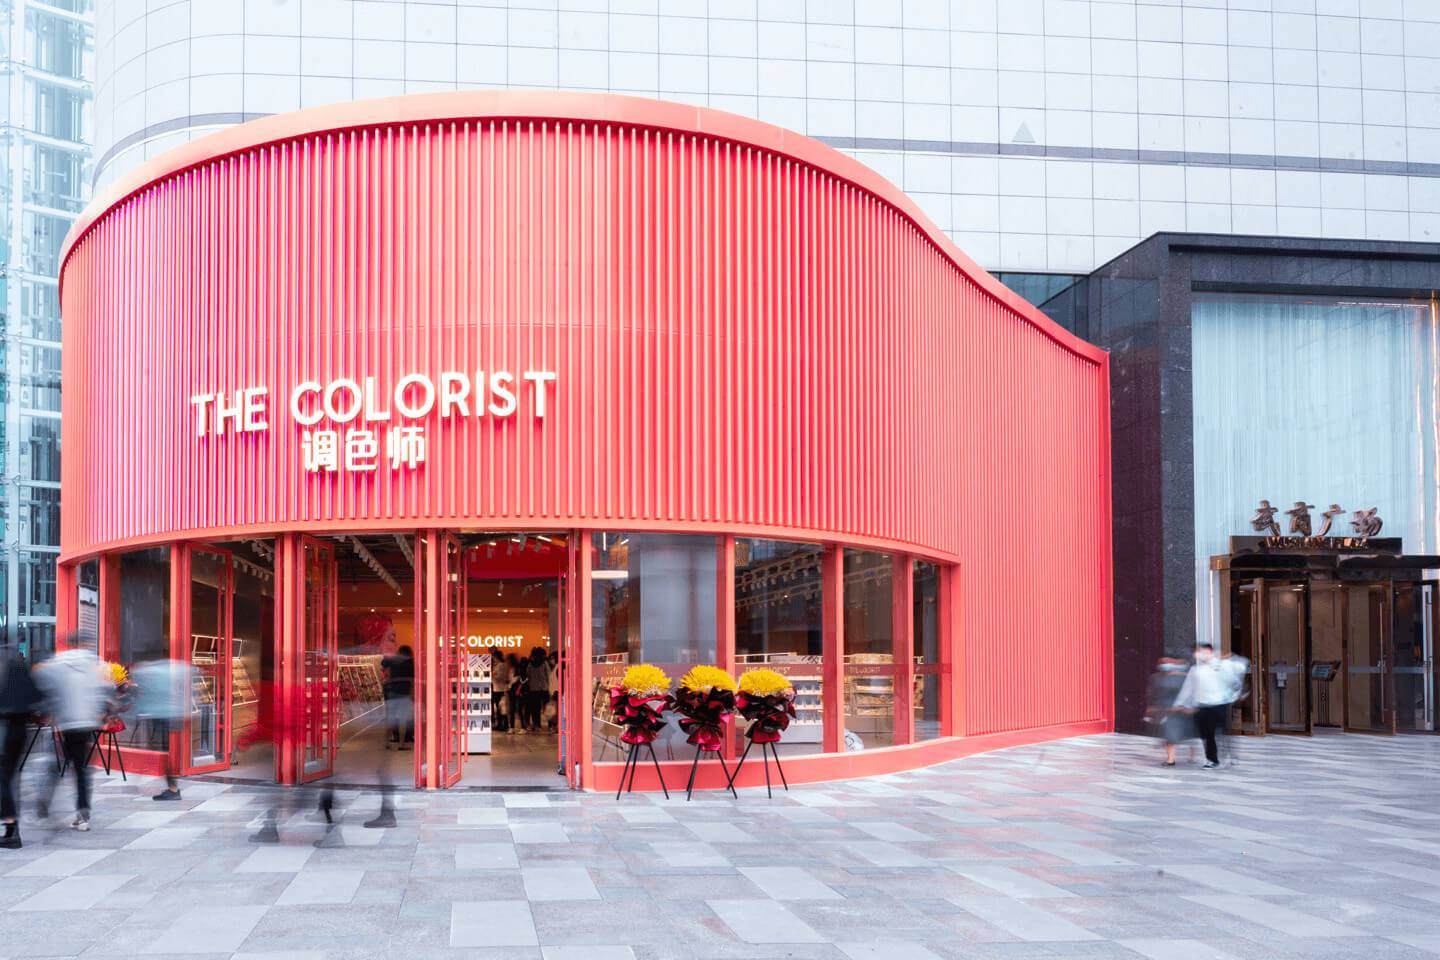 The exterior of one of The Colorist's 300-plus stores. KK Group